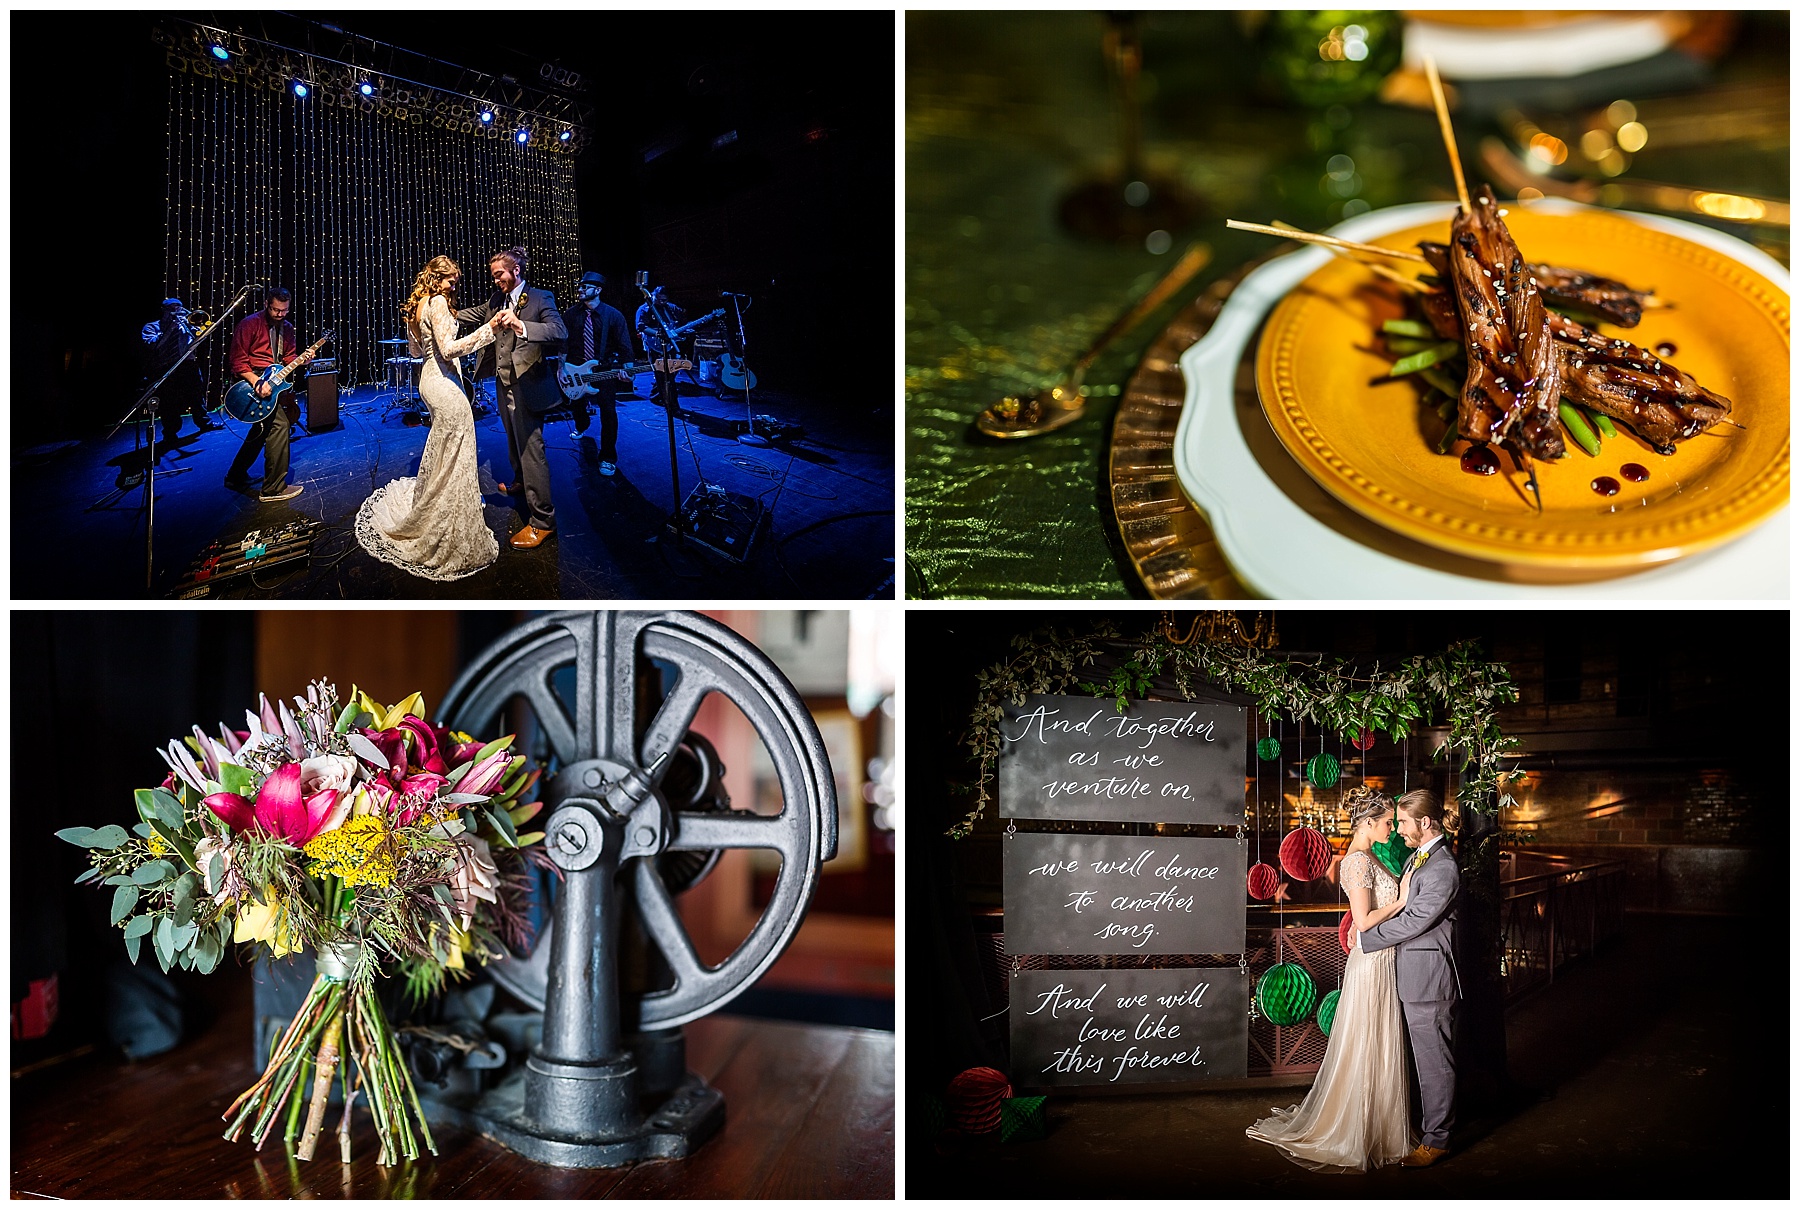 norva wedding, montero's, kathy forrest floral design, letterlyn, misty saves the day, woah! 90s, stage right lighting, coastal virginia bride